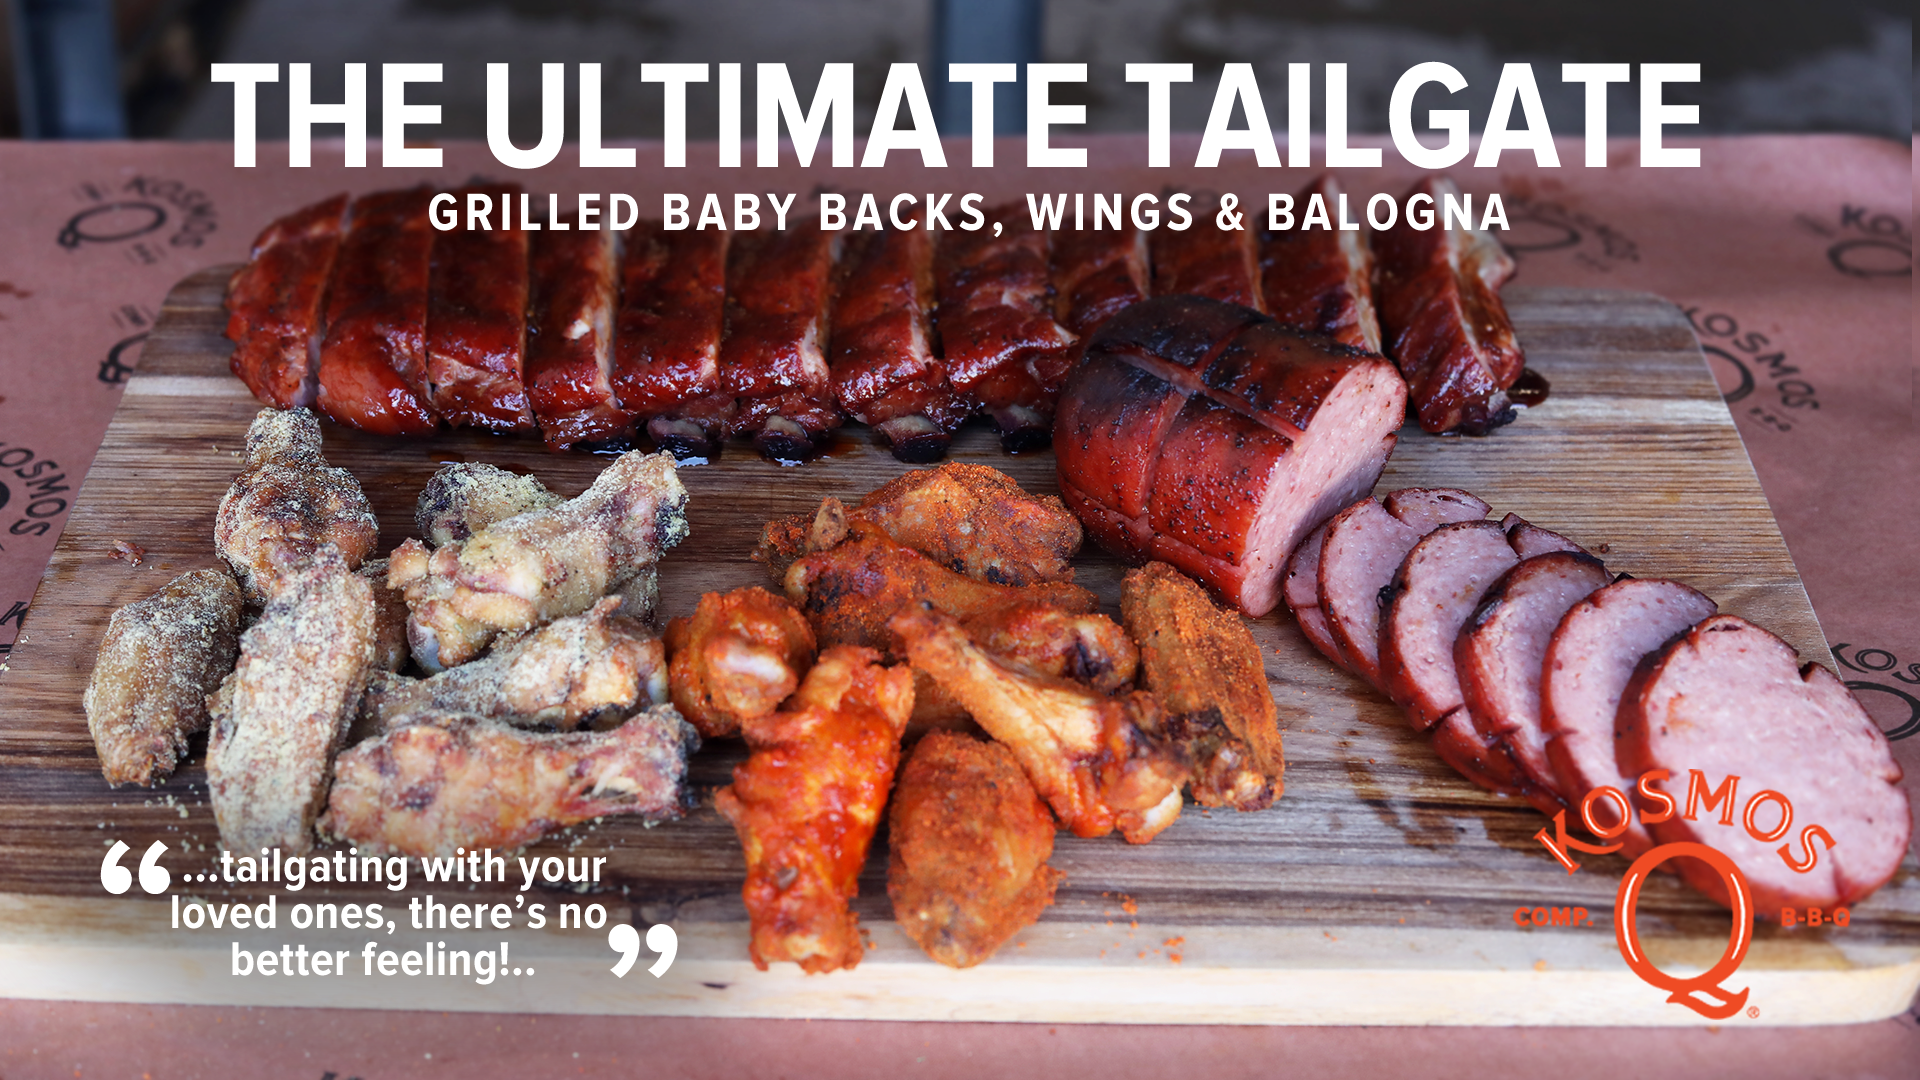 The Ultimate Tailgate - Baby Backs, Wings & Balogna